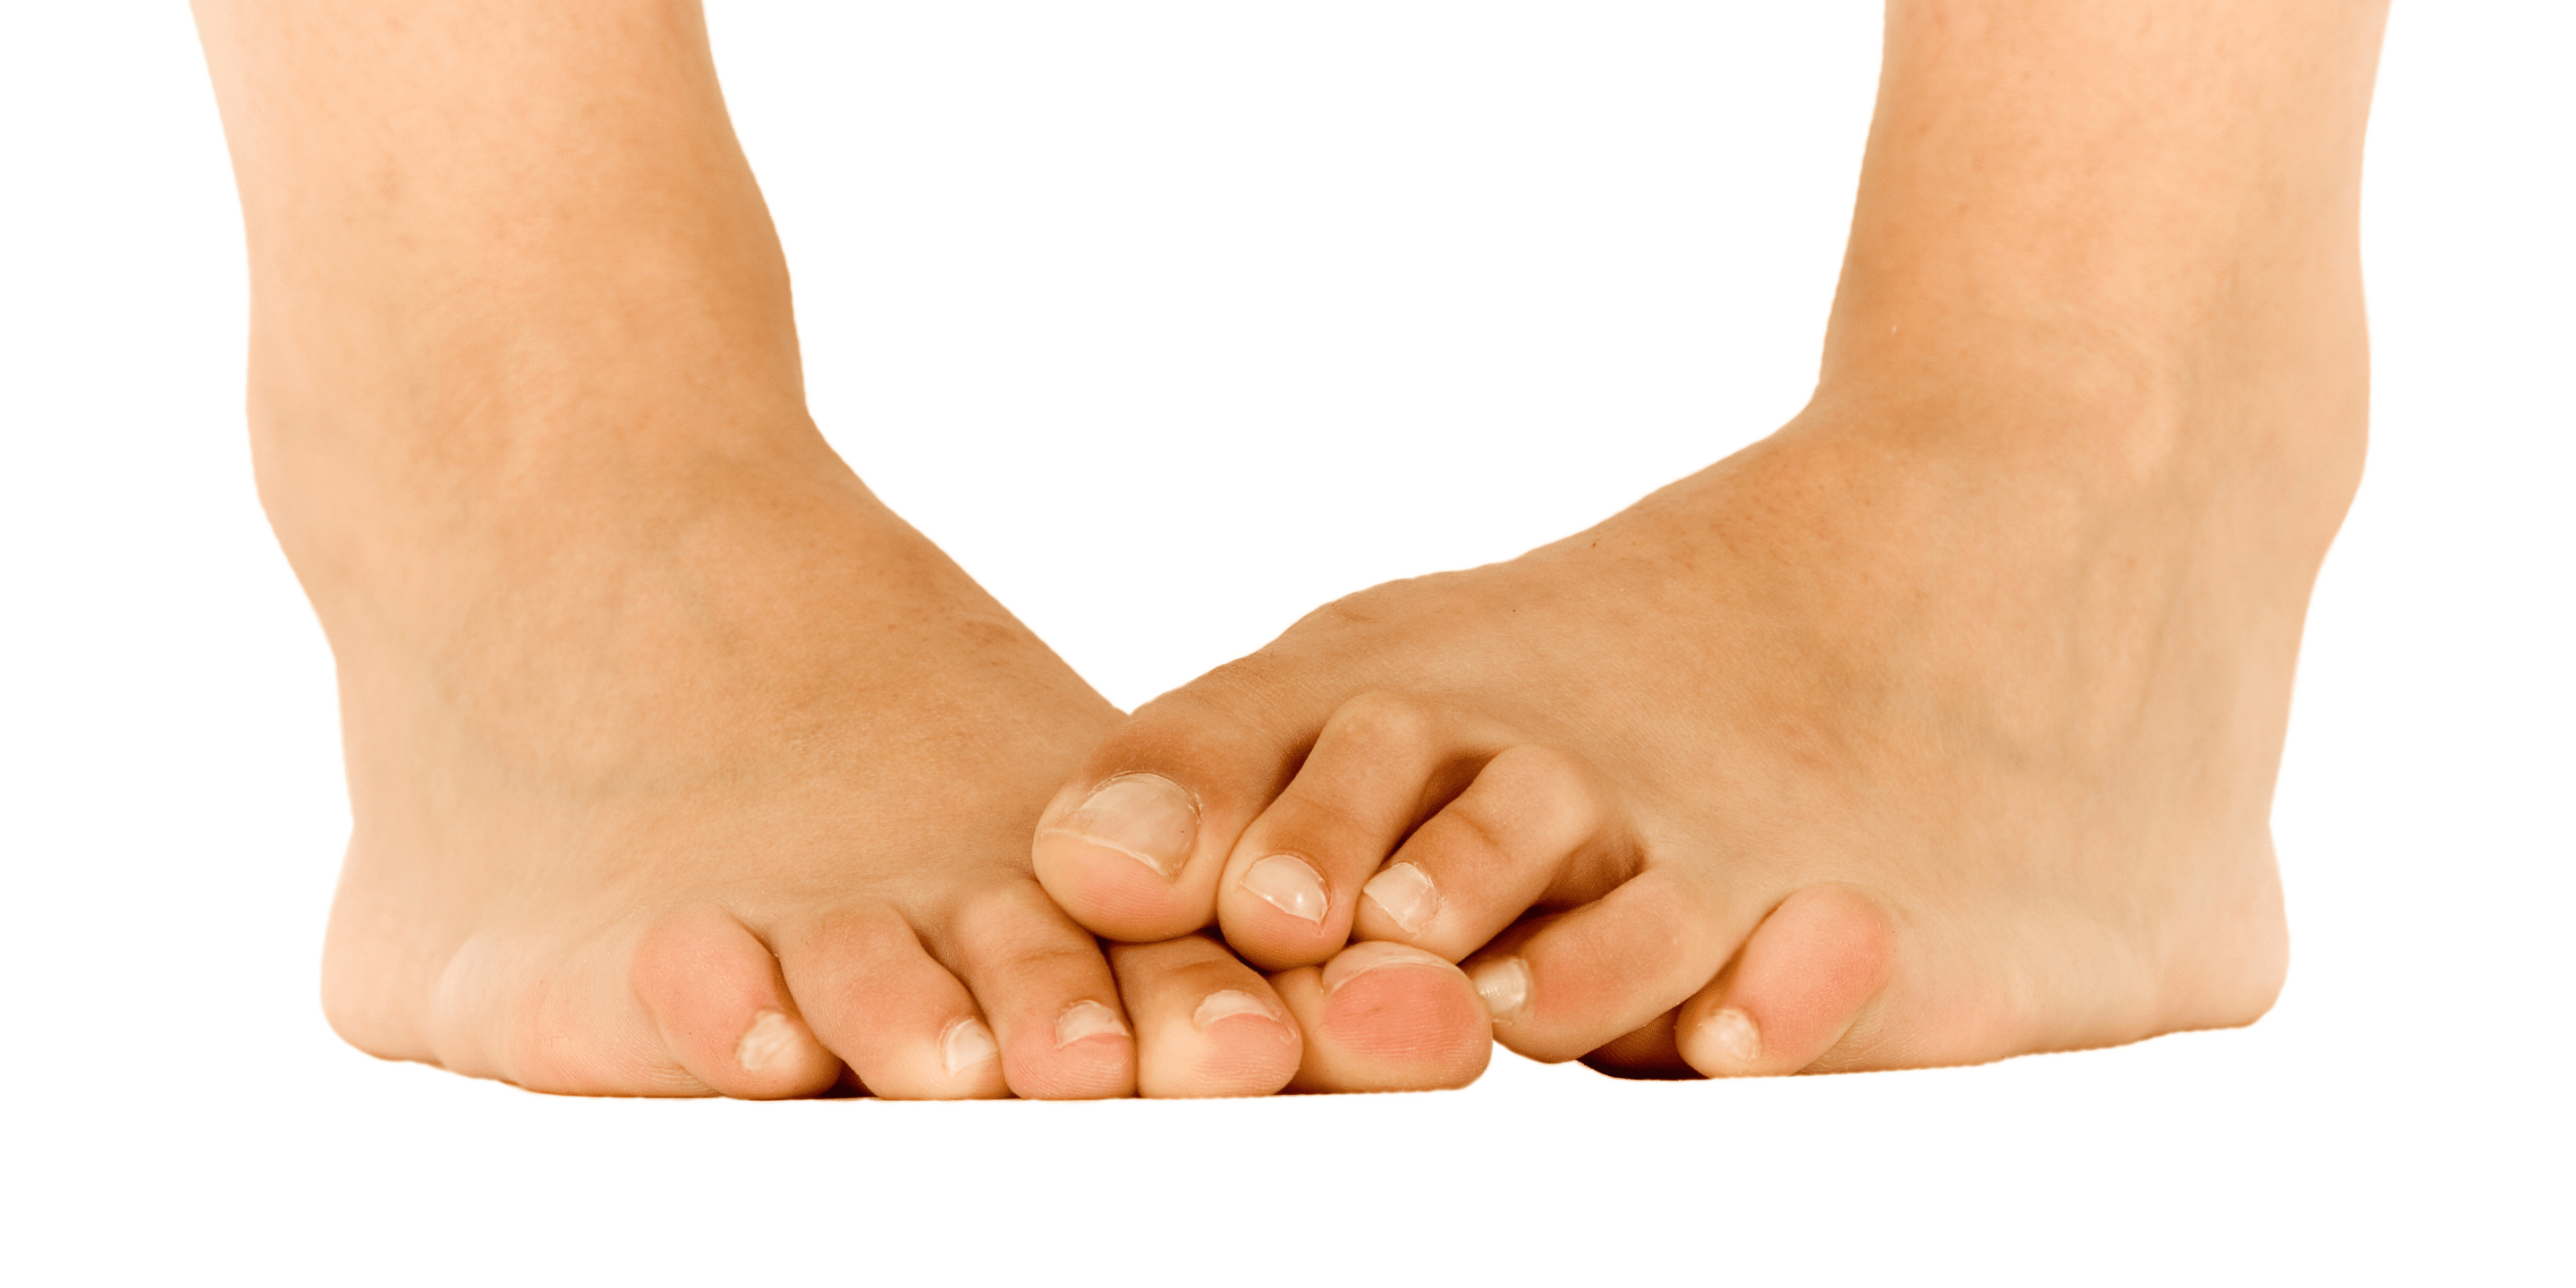 Feet on top of each other on white background